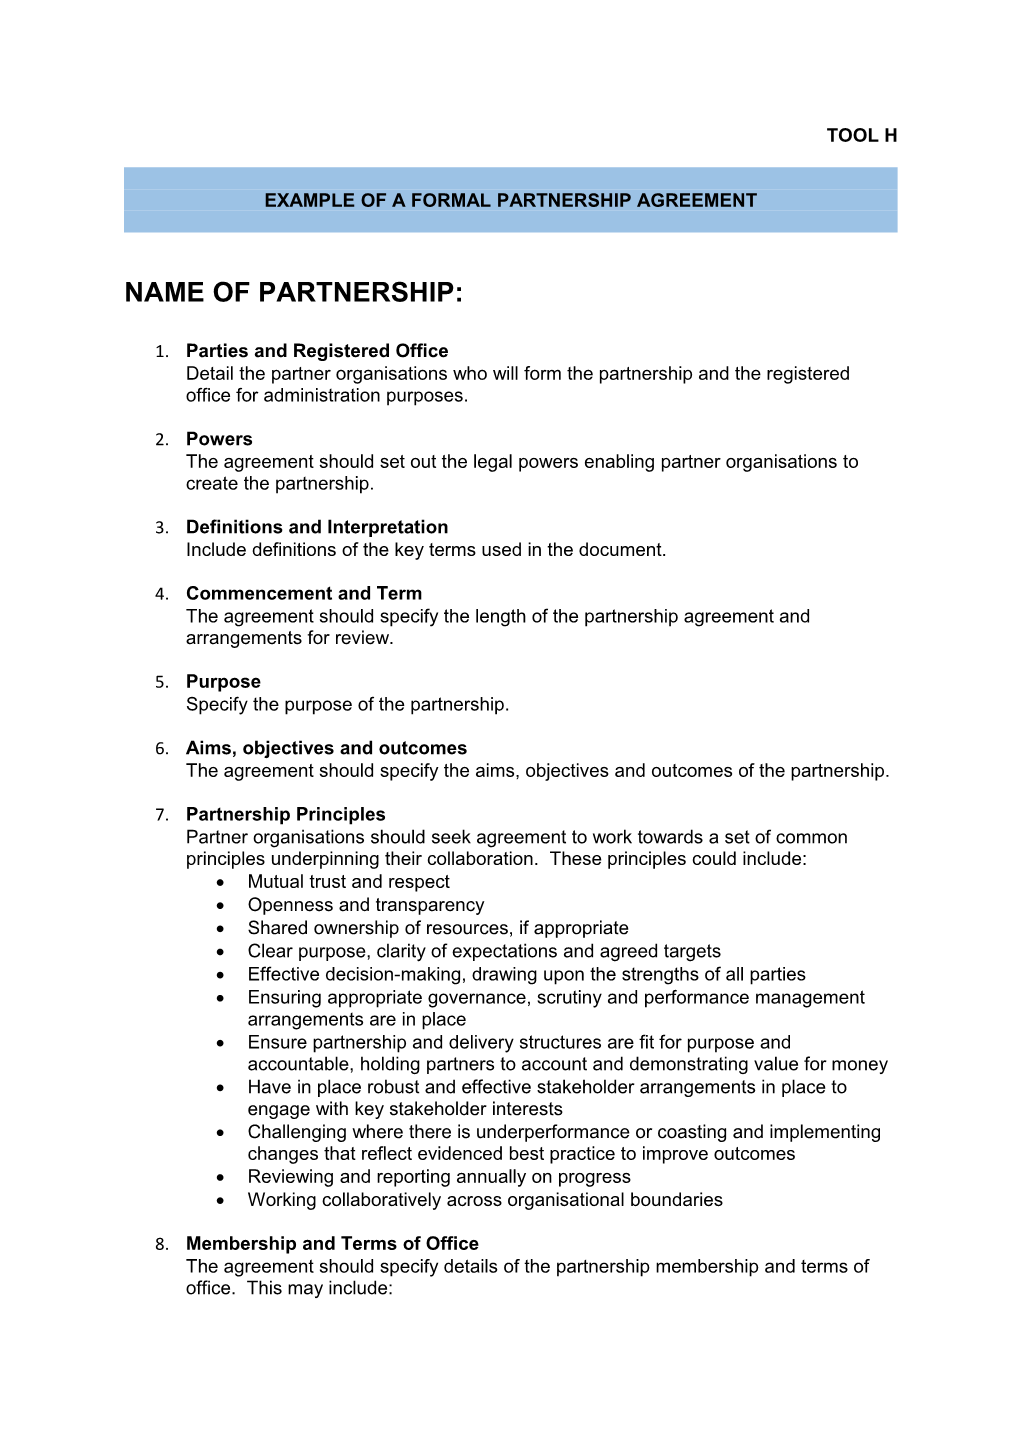 Example of a Formal Partnership Agreement